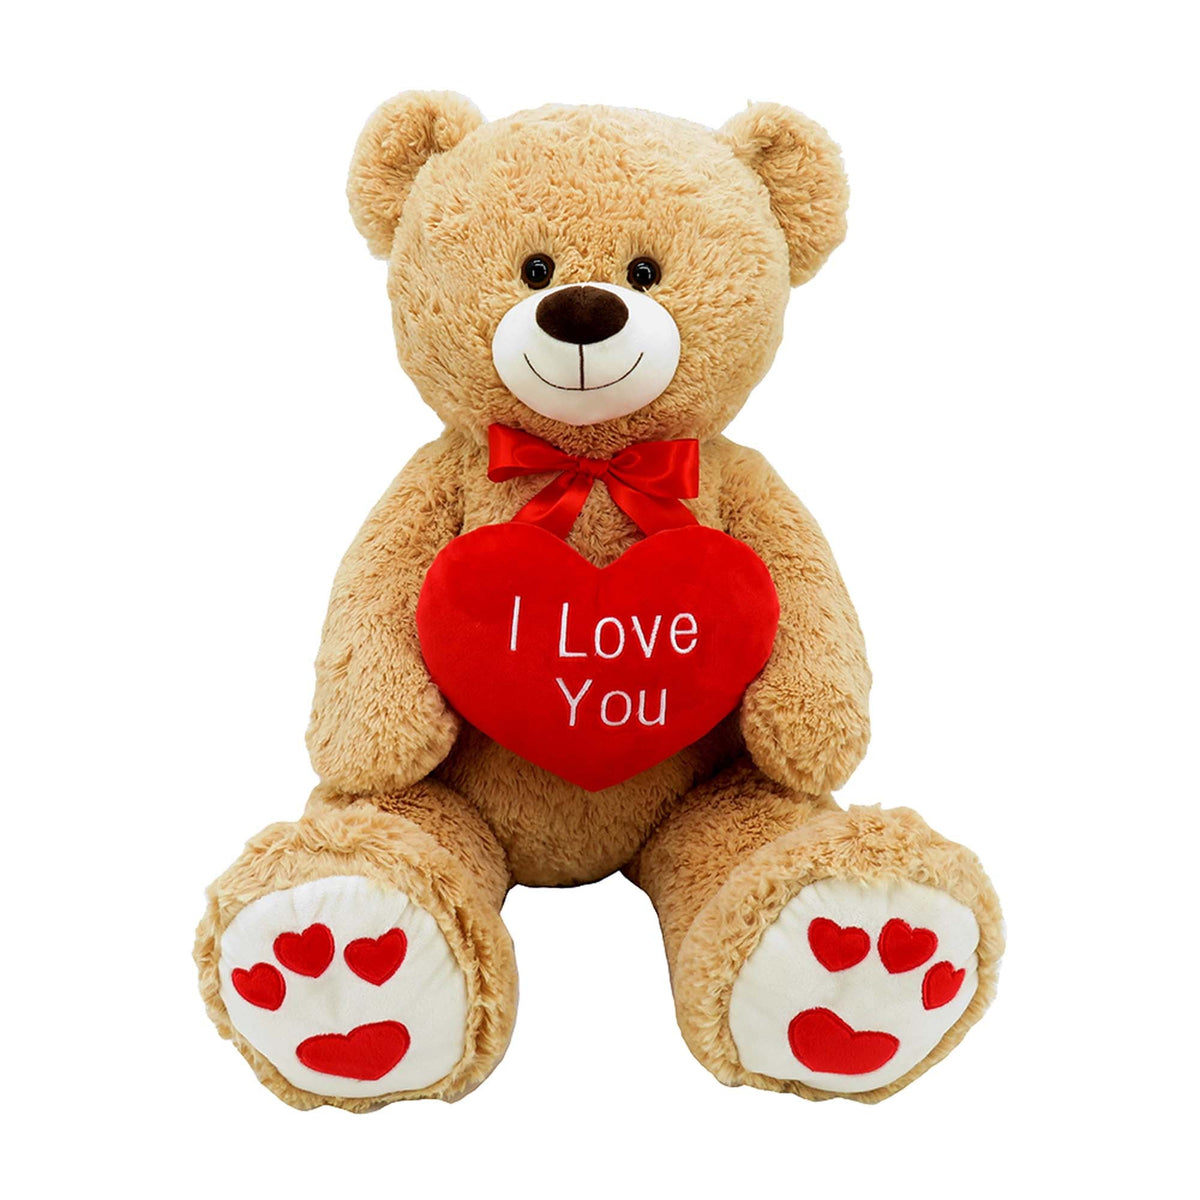 LINZY TOYS INC. Valentine's Day Valentine's Day Giant Teddy Bear Plush, Light Brown, 36 Inches, 1 Count